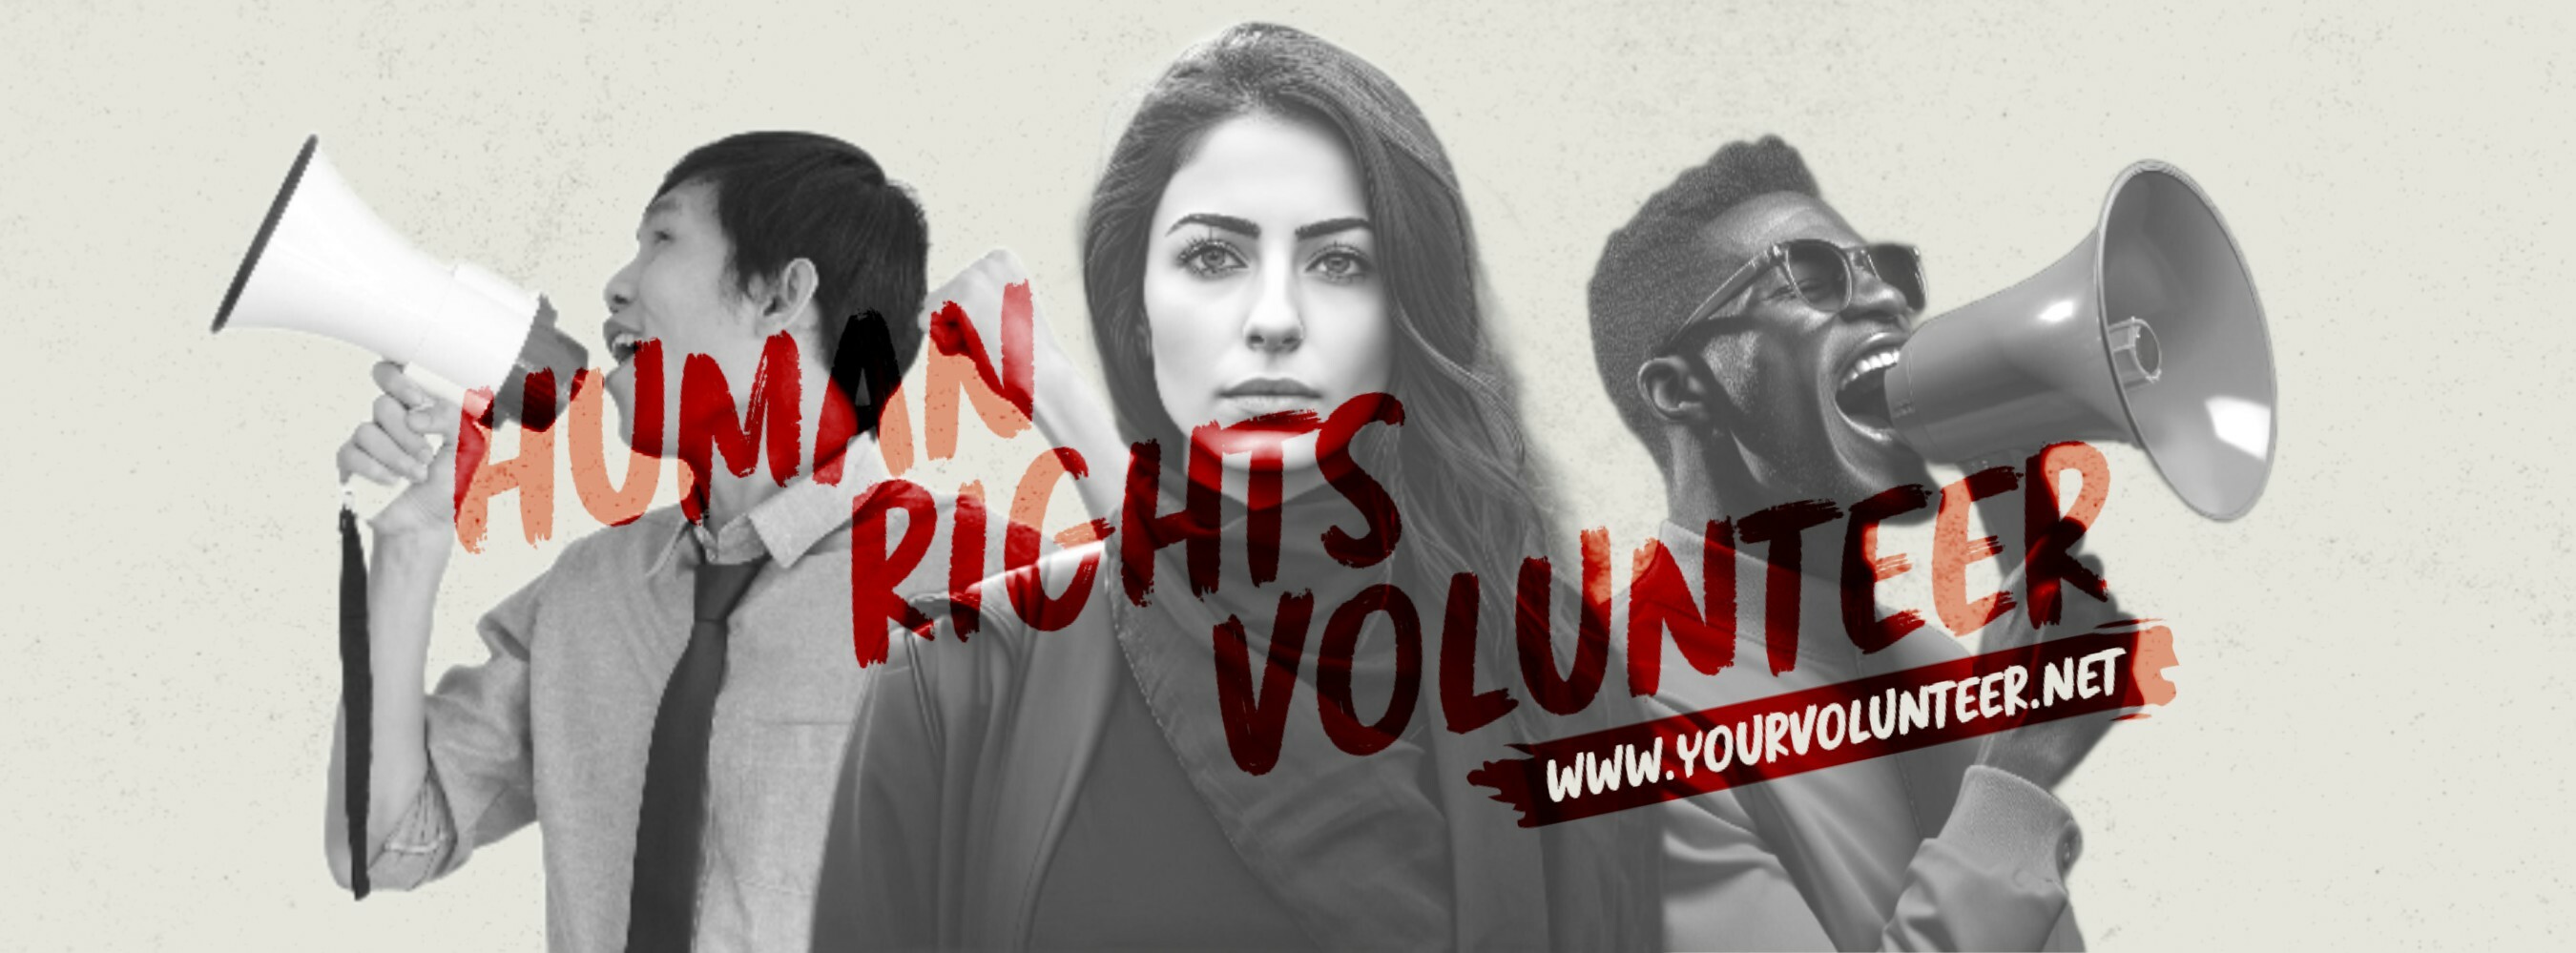 Human Rights Volunteer for Facebook Cover